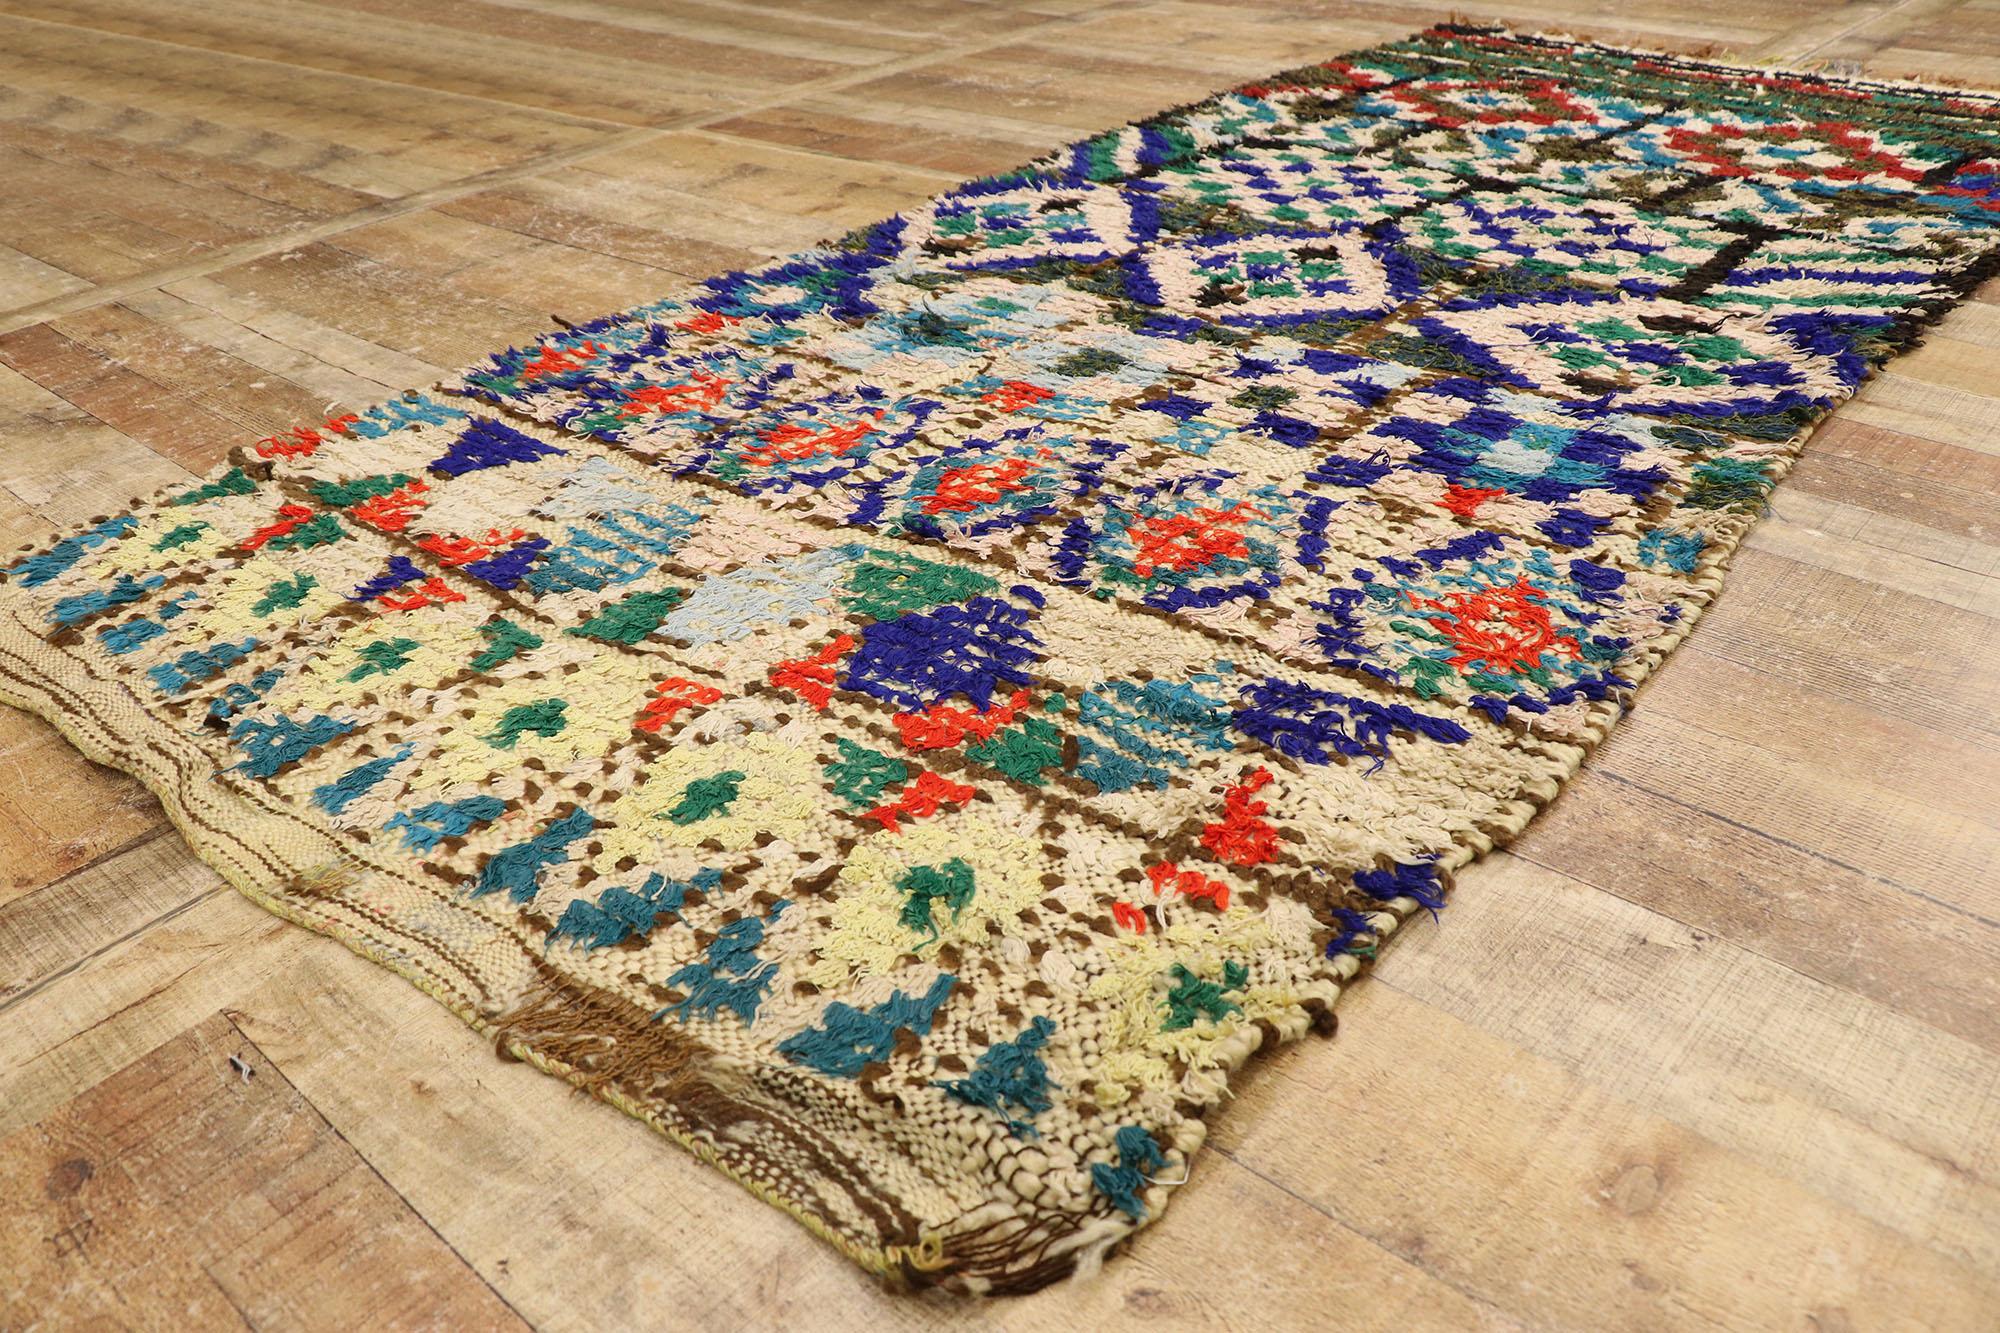 Vintage Berber Moroccan Azilal Rug, Gyset Boho Meets Rustic Jungalow In Good Condition For Sale In Dallas, TX